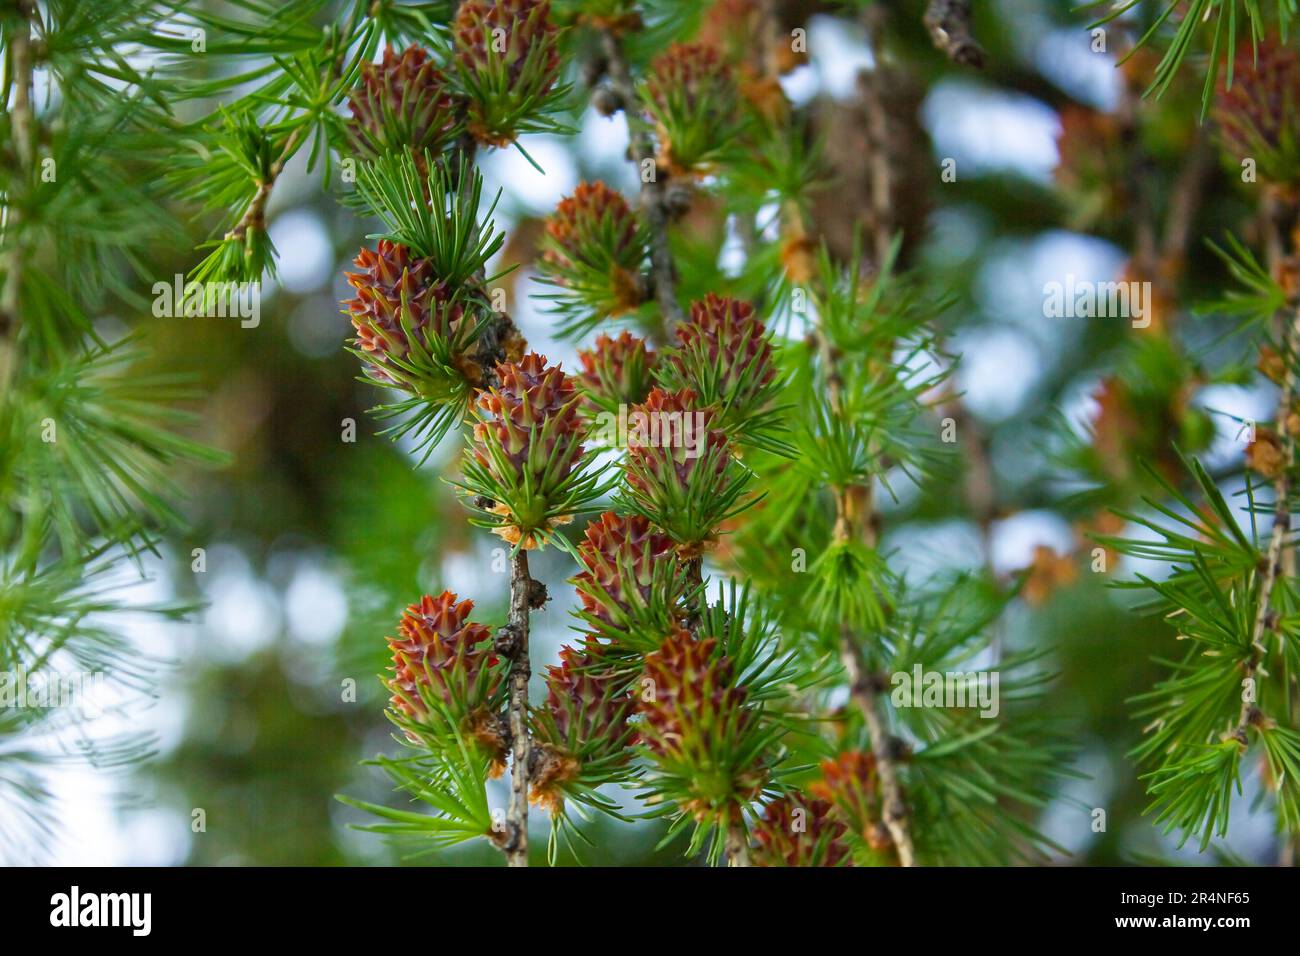 Larch tree fresh cones on nature background. Branches with young needles European larch Larix decidua. Bright green fluffy branches with cones of larc Stock Photo